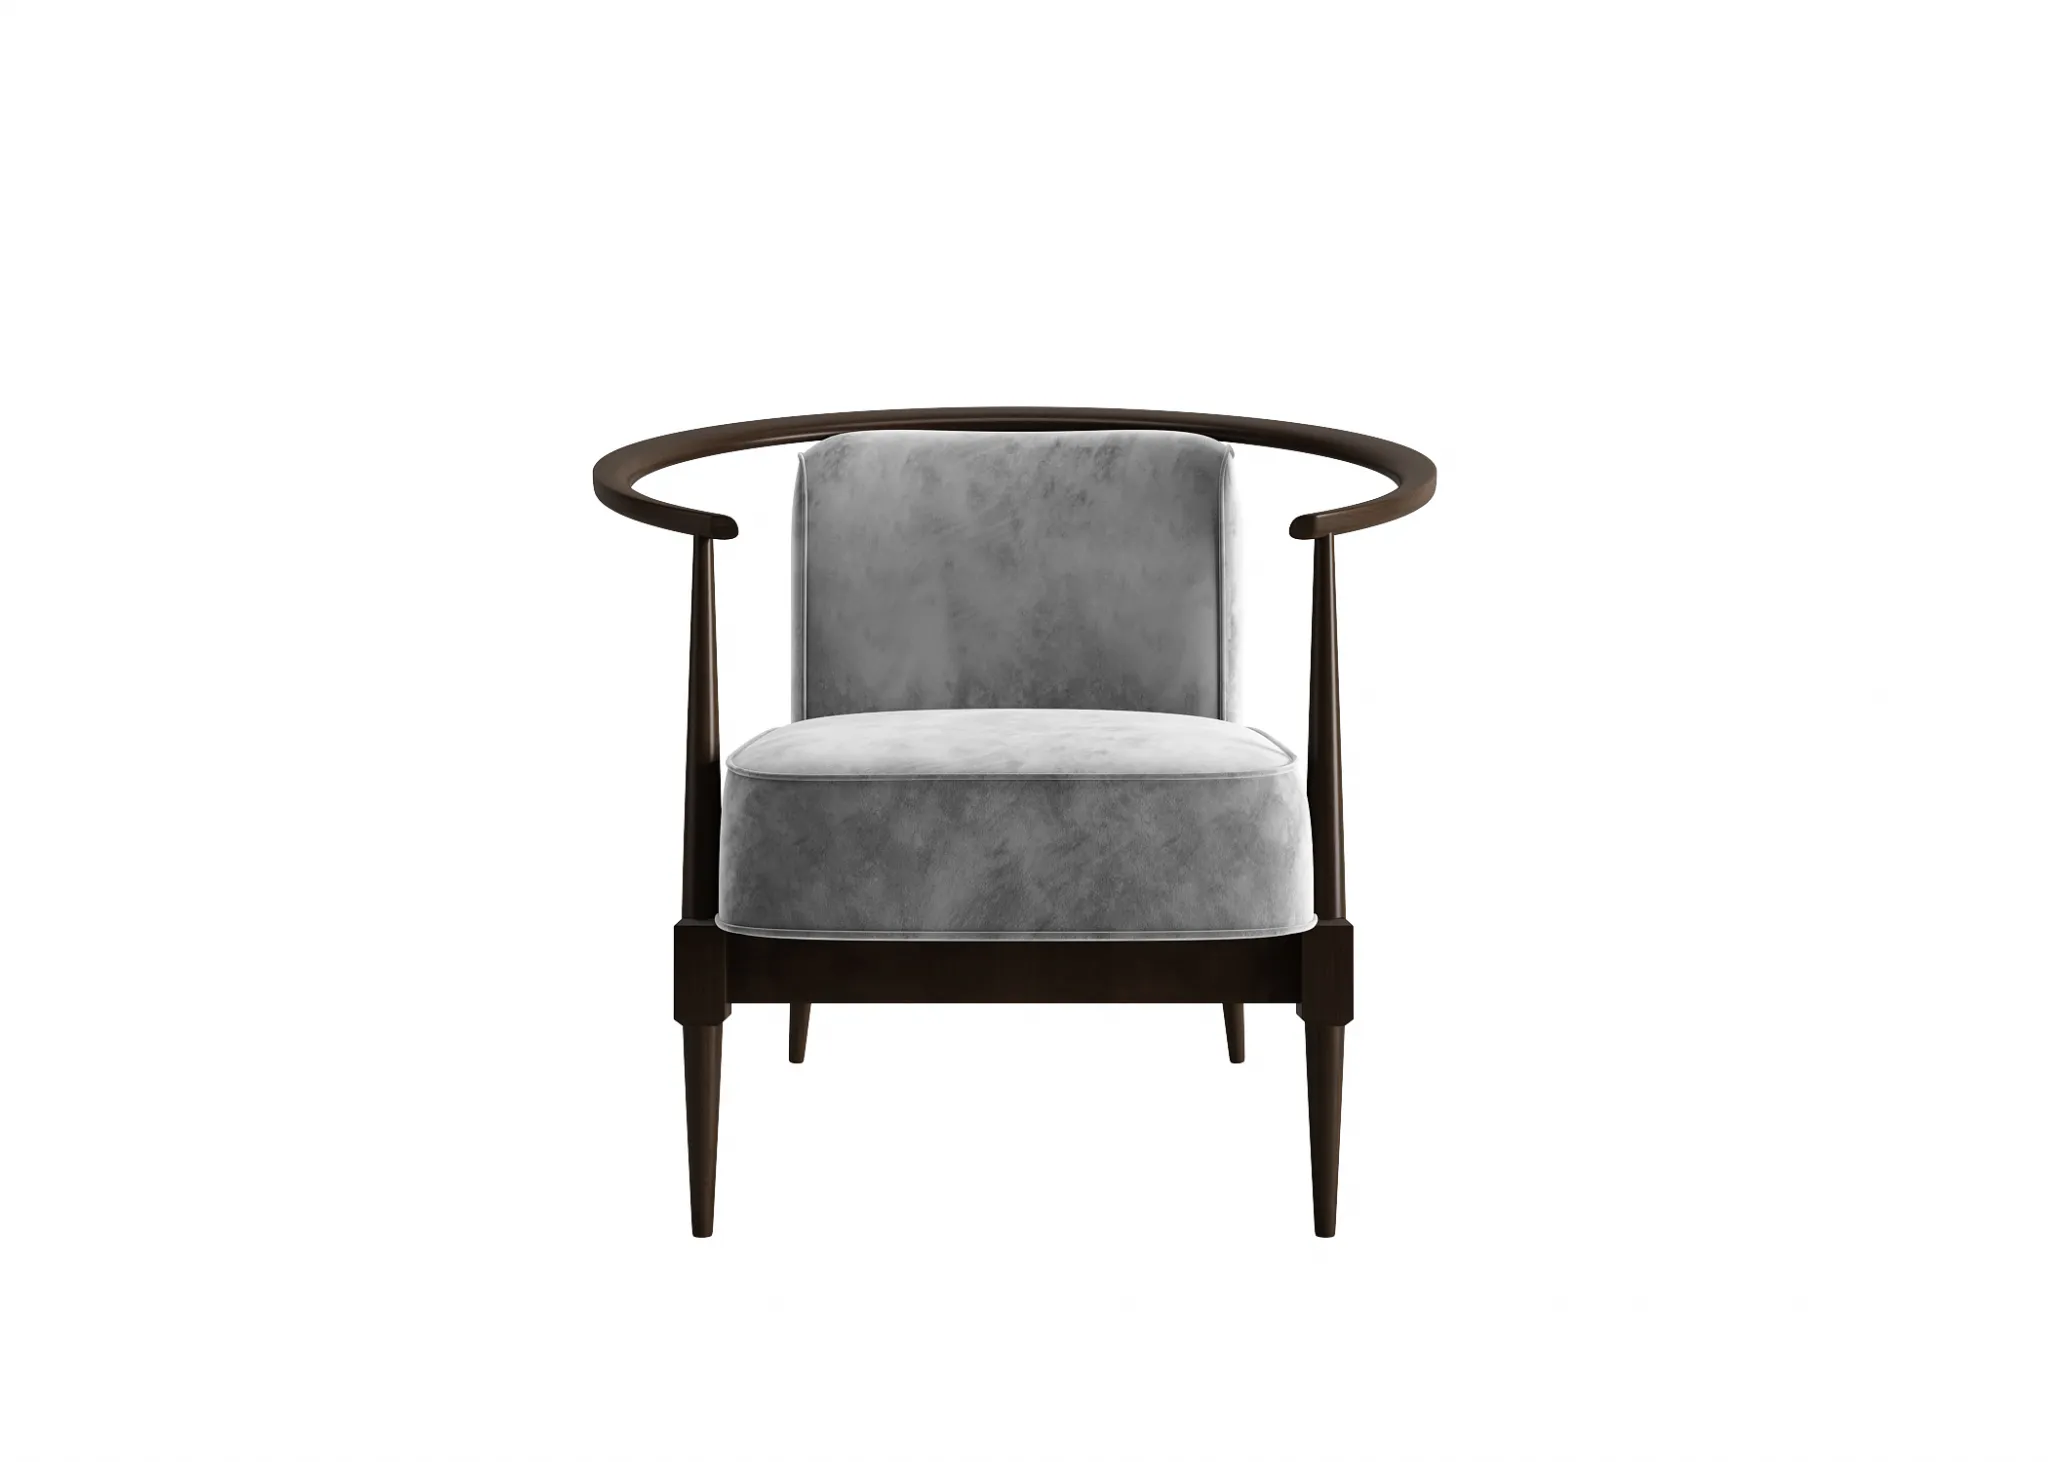 FURNITURE 3D MODELS – CHAIRS – 0514